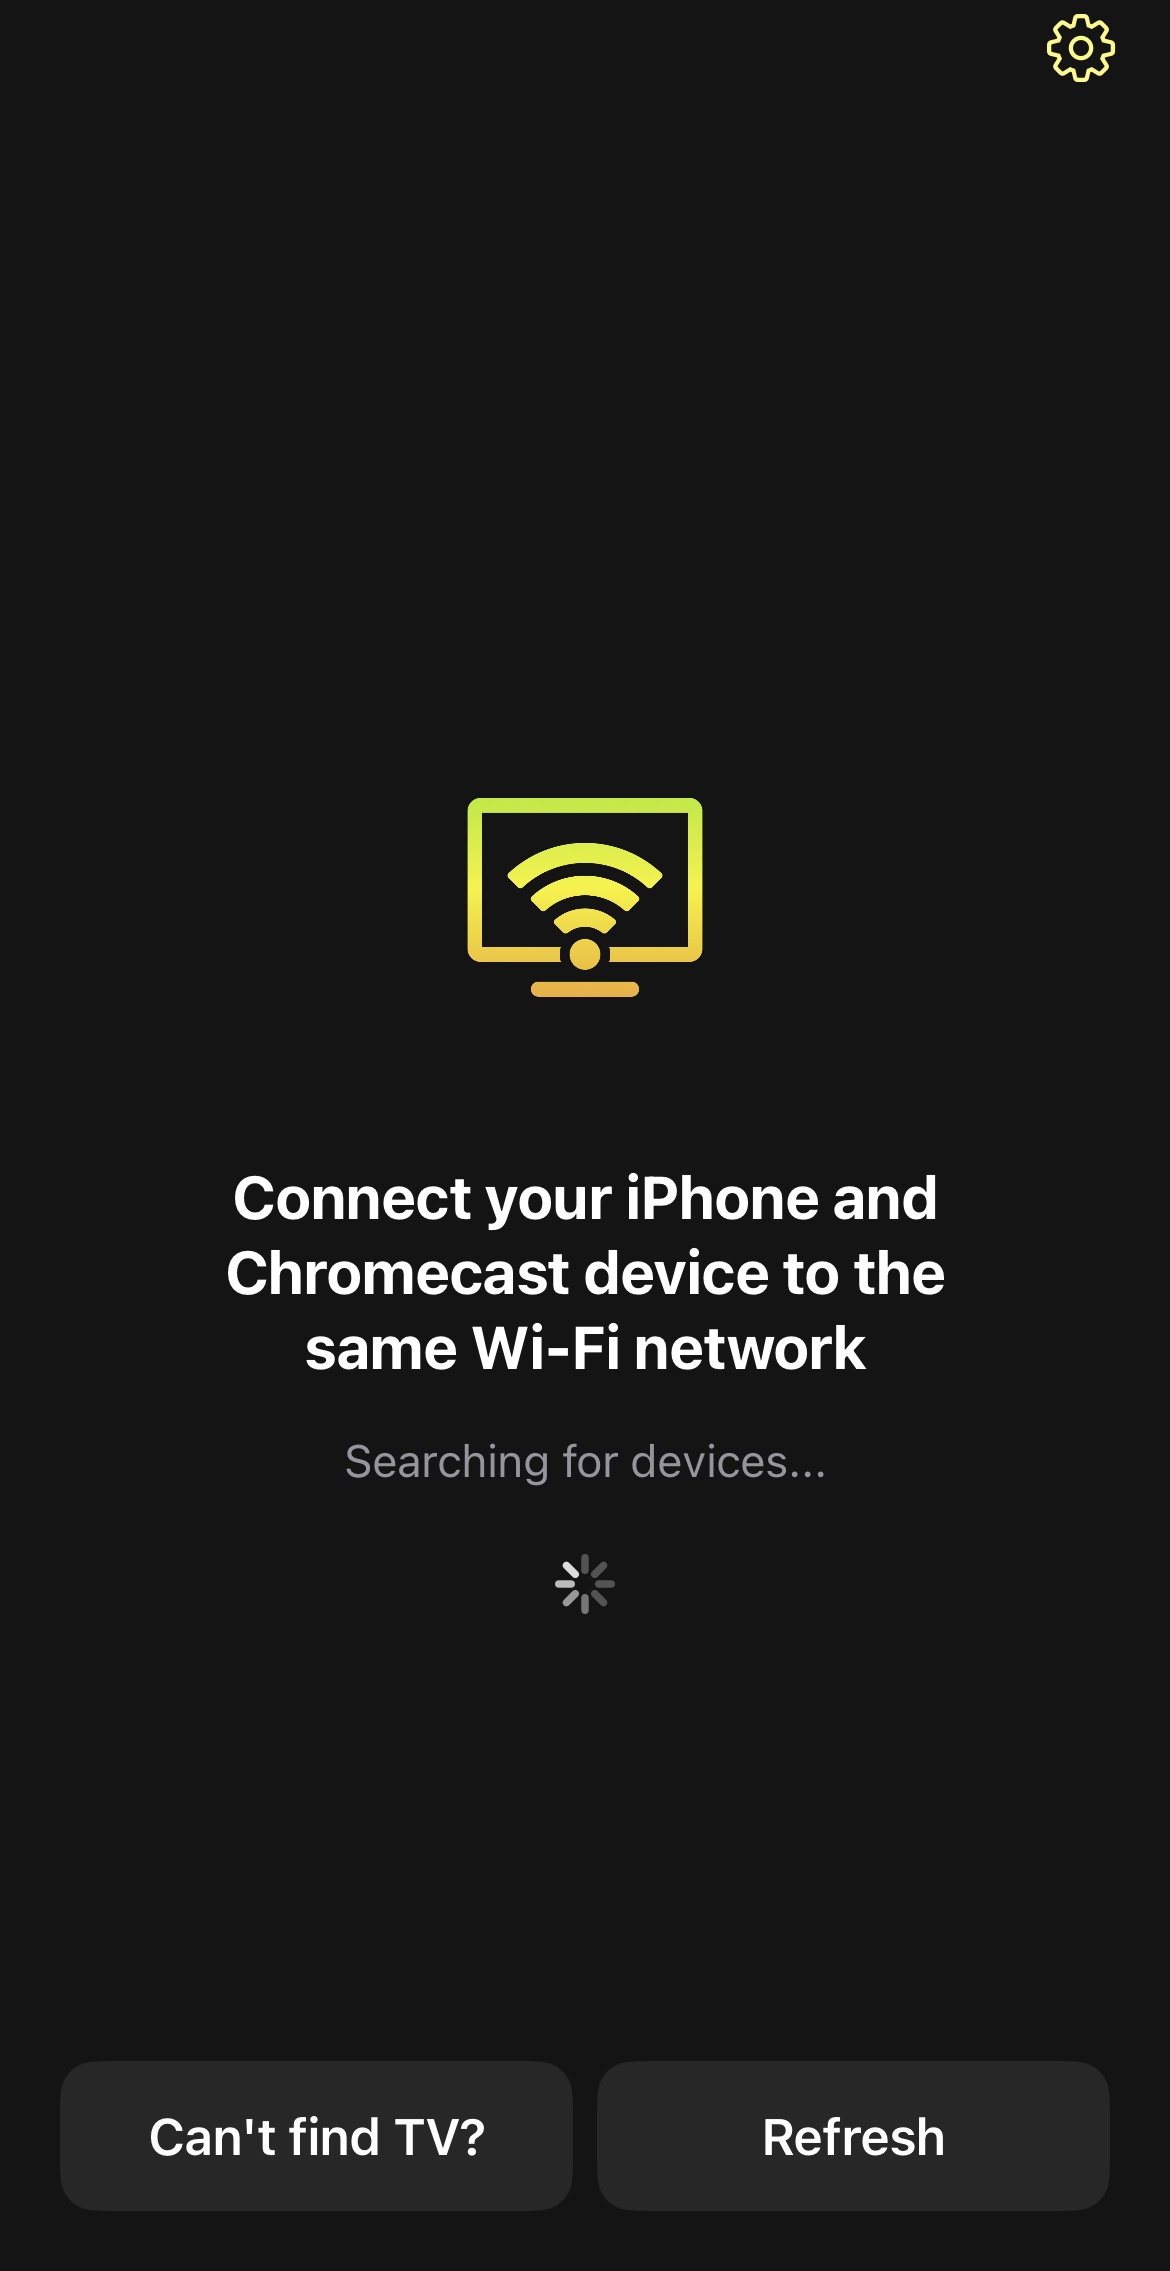 DoCast is searching for nearby Chromecast devices